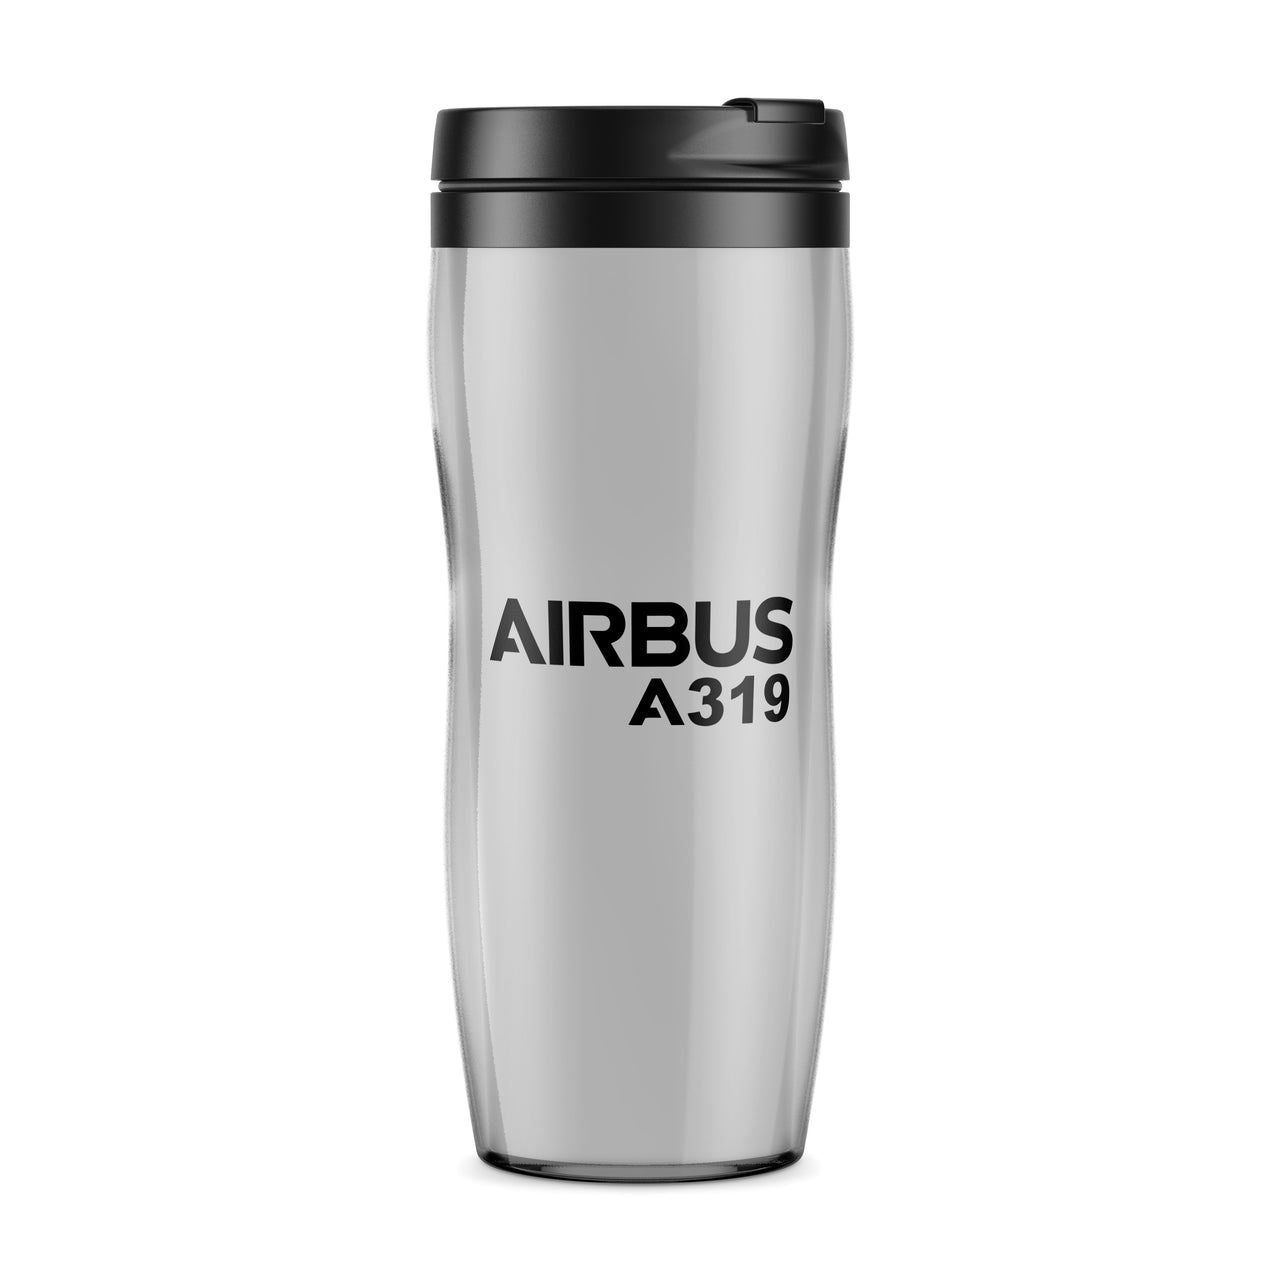 Airbus A319 & Text Designed Travel Mugs